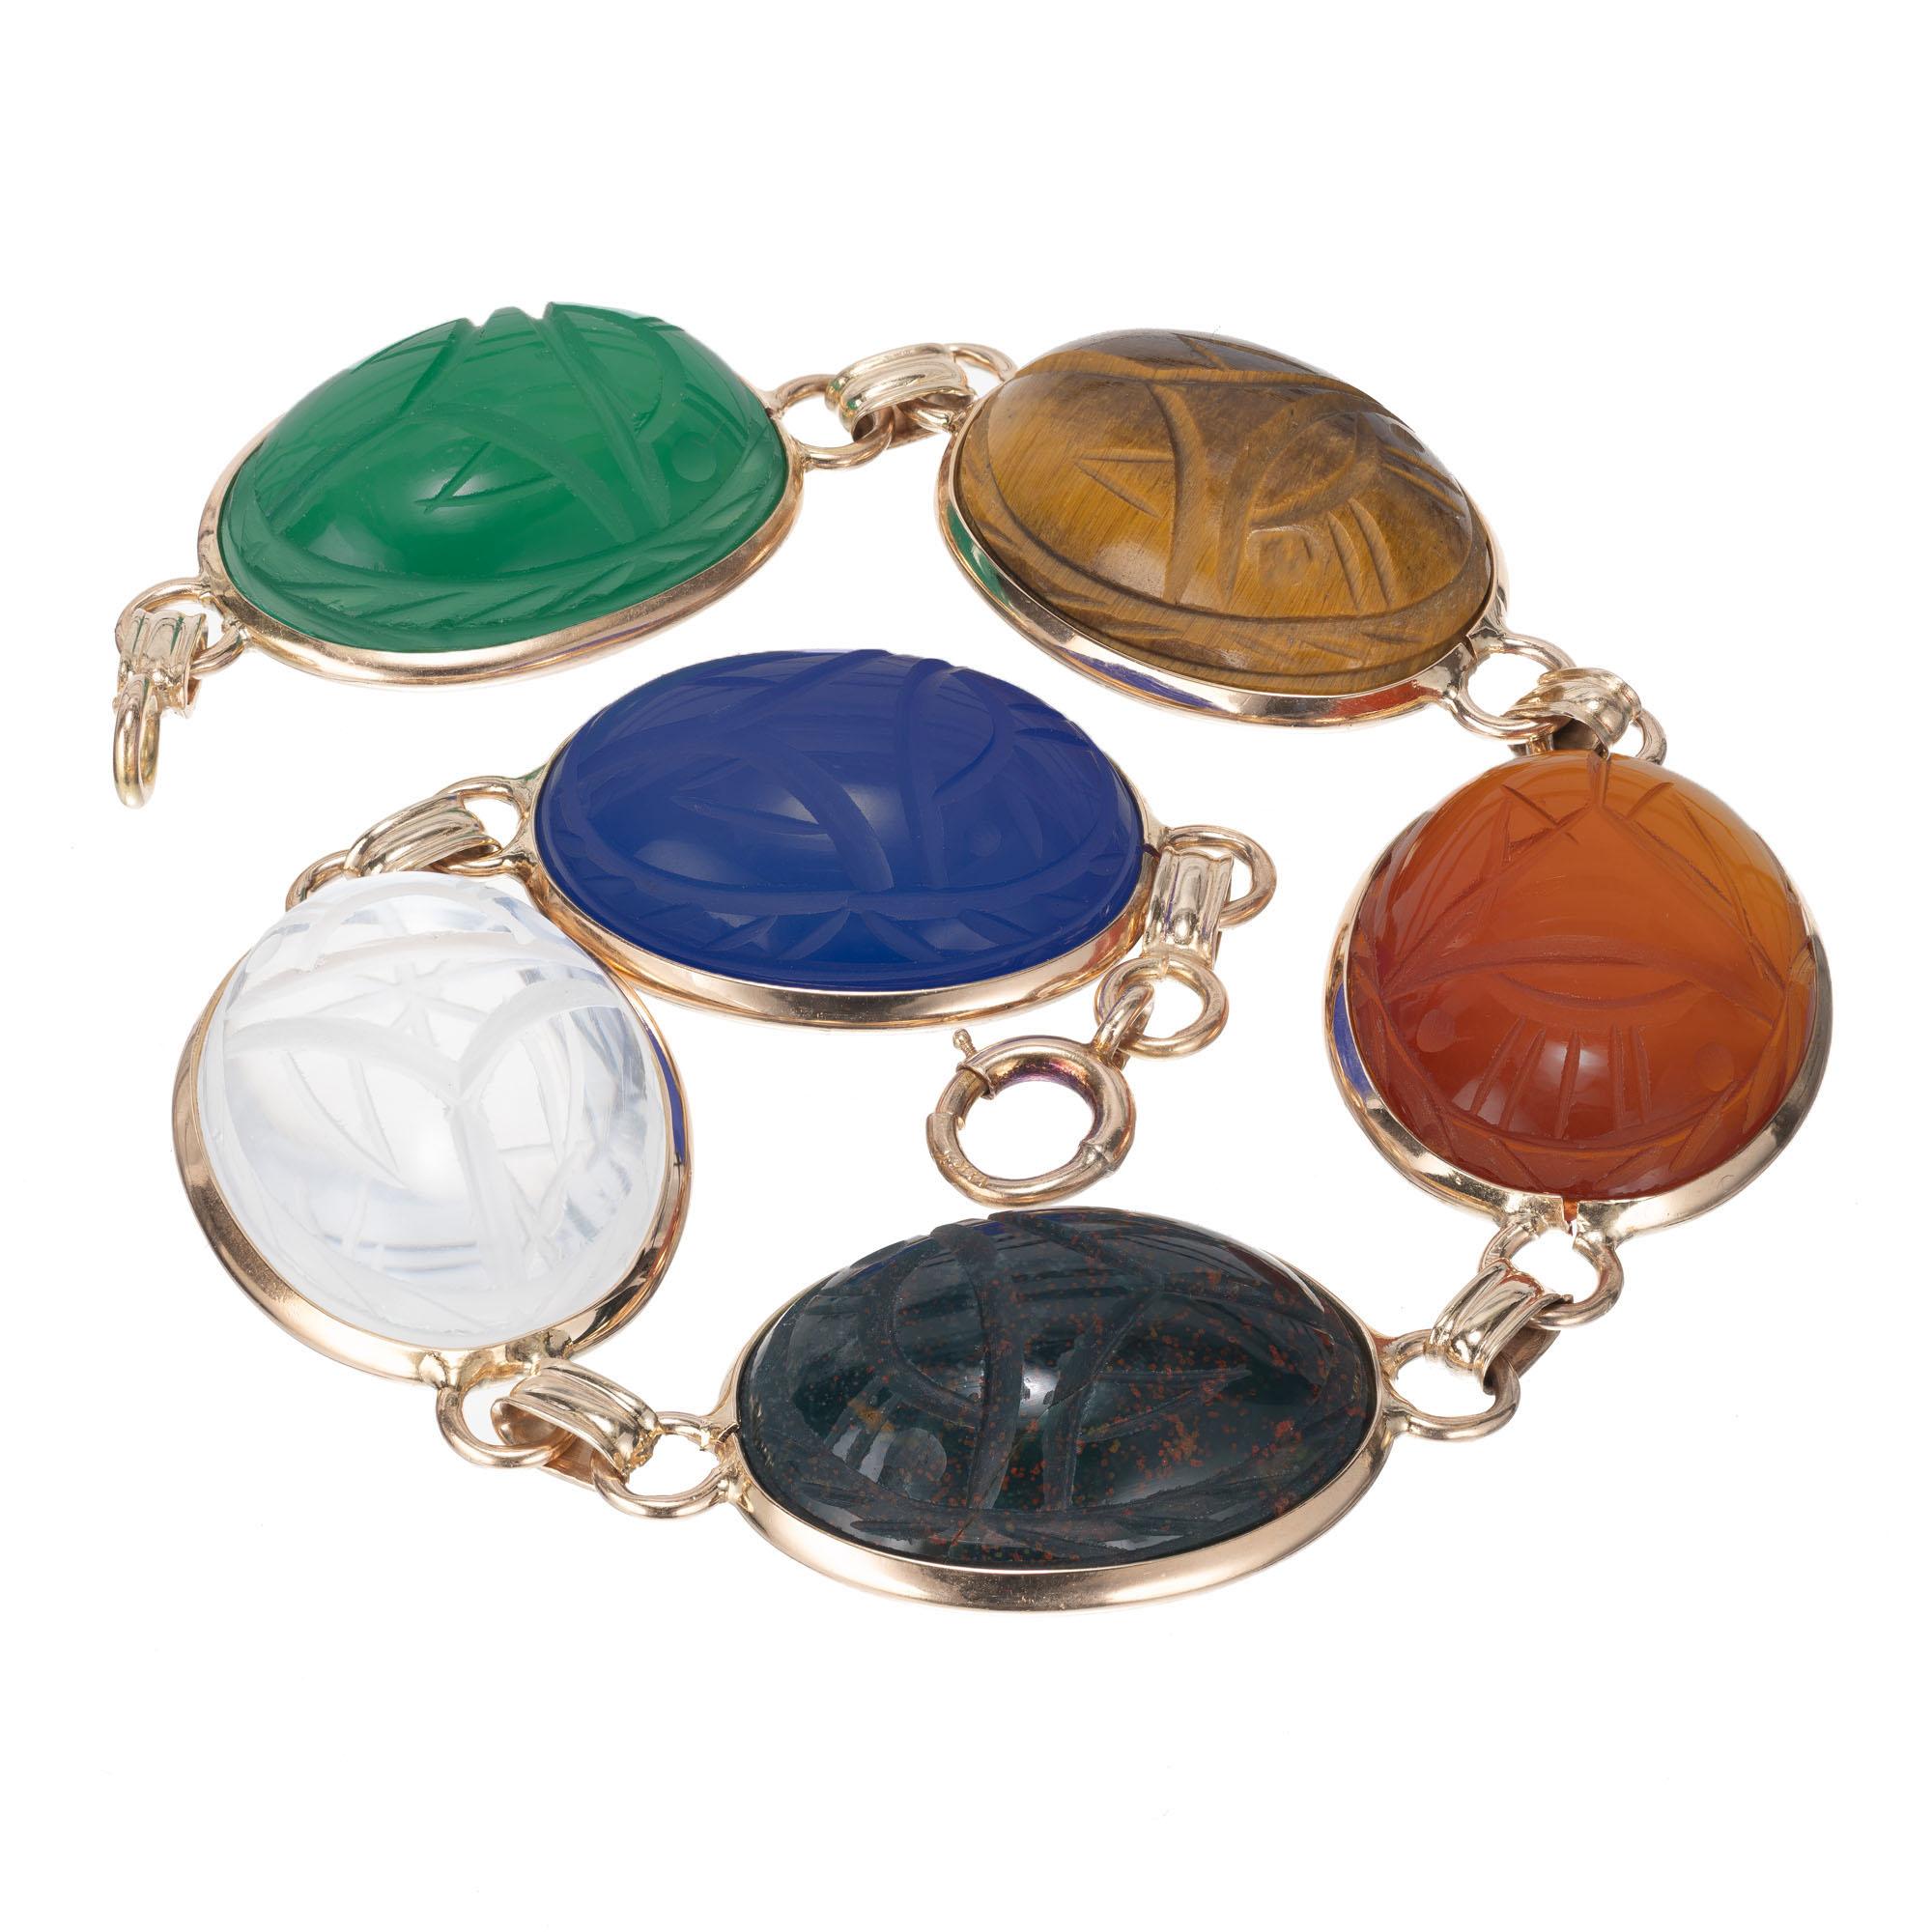 Authentic 1940 14k yellow gold large Scarab bracelet. Multi-color Quartz stones carved front and back in gold bezels. The Scarab is the Egyptian symbol for eternal life.

1 oval Chrysophase 19.47 x 14.71 x 6.71mm
1 oval Tiger eye
1 oval